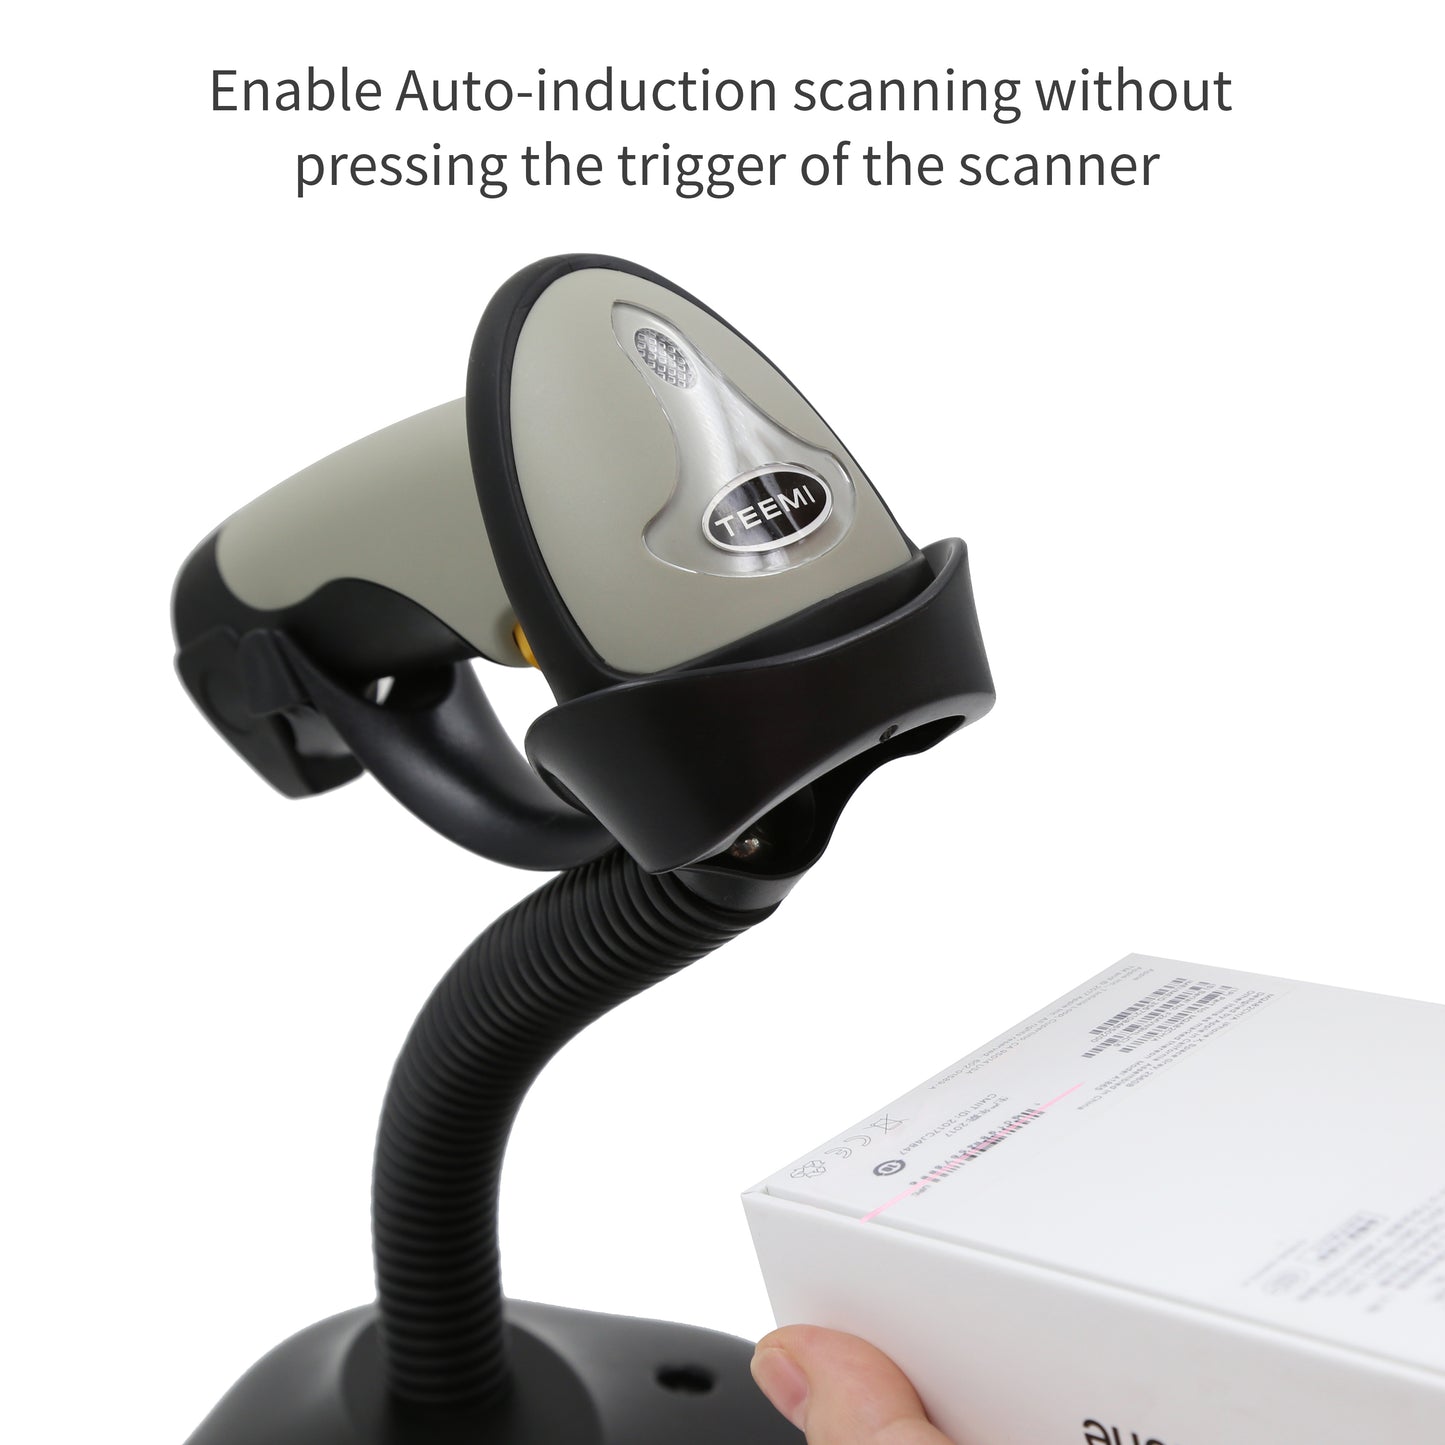 TEEMI TMCT-10 Bluetooth Barcode Scanner 1d Laser Handheld Automatic Bar Code Reader for iPhone iPad Android Tablet PC, Mac OS X, Android, Windows and iOS